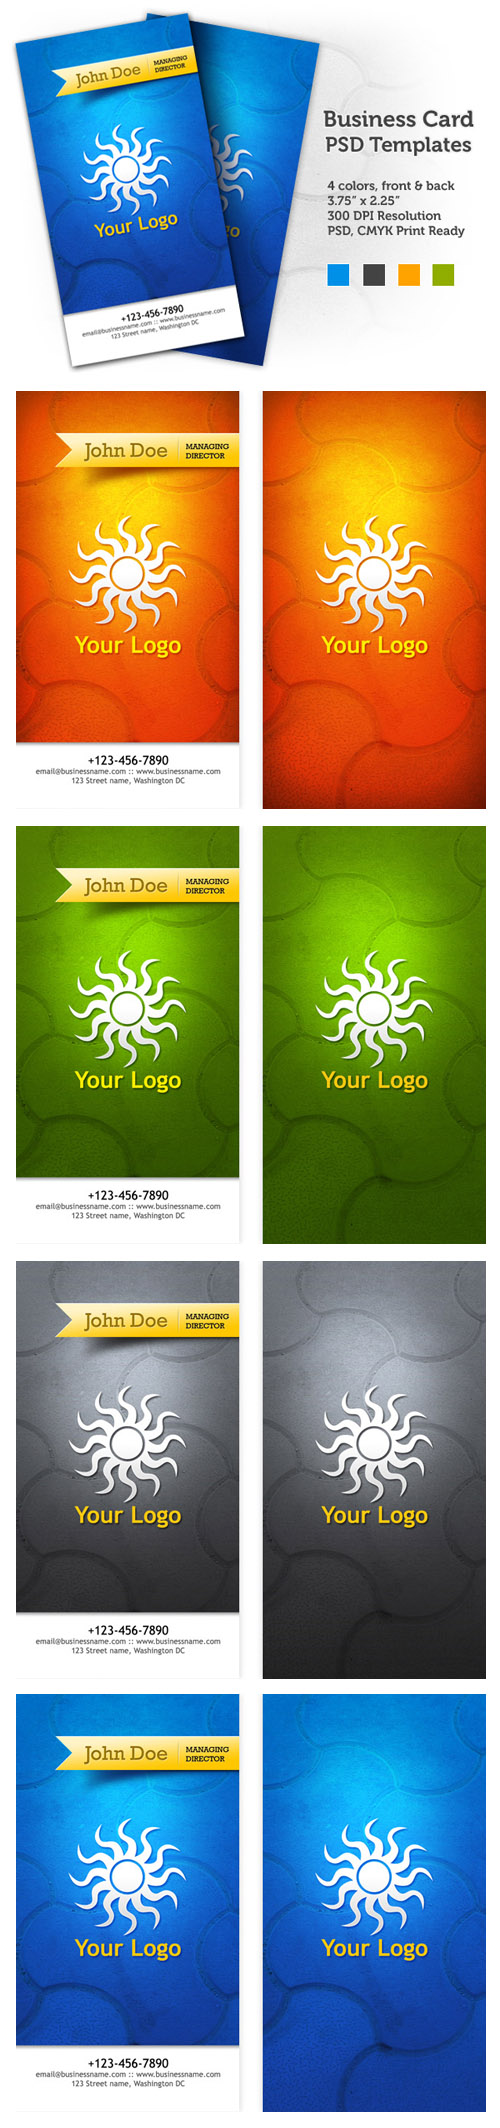 Stylish Business Cards - PSD templates